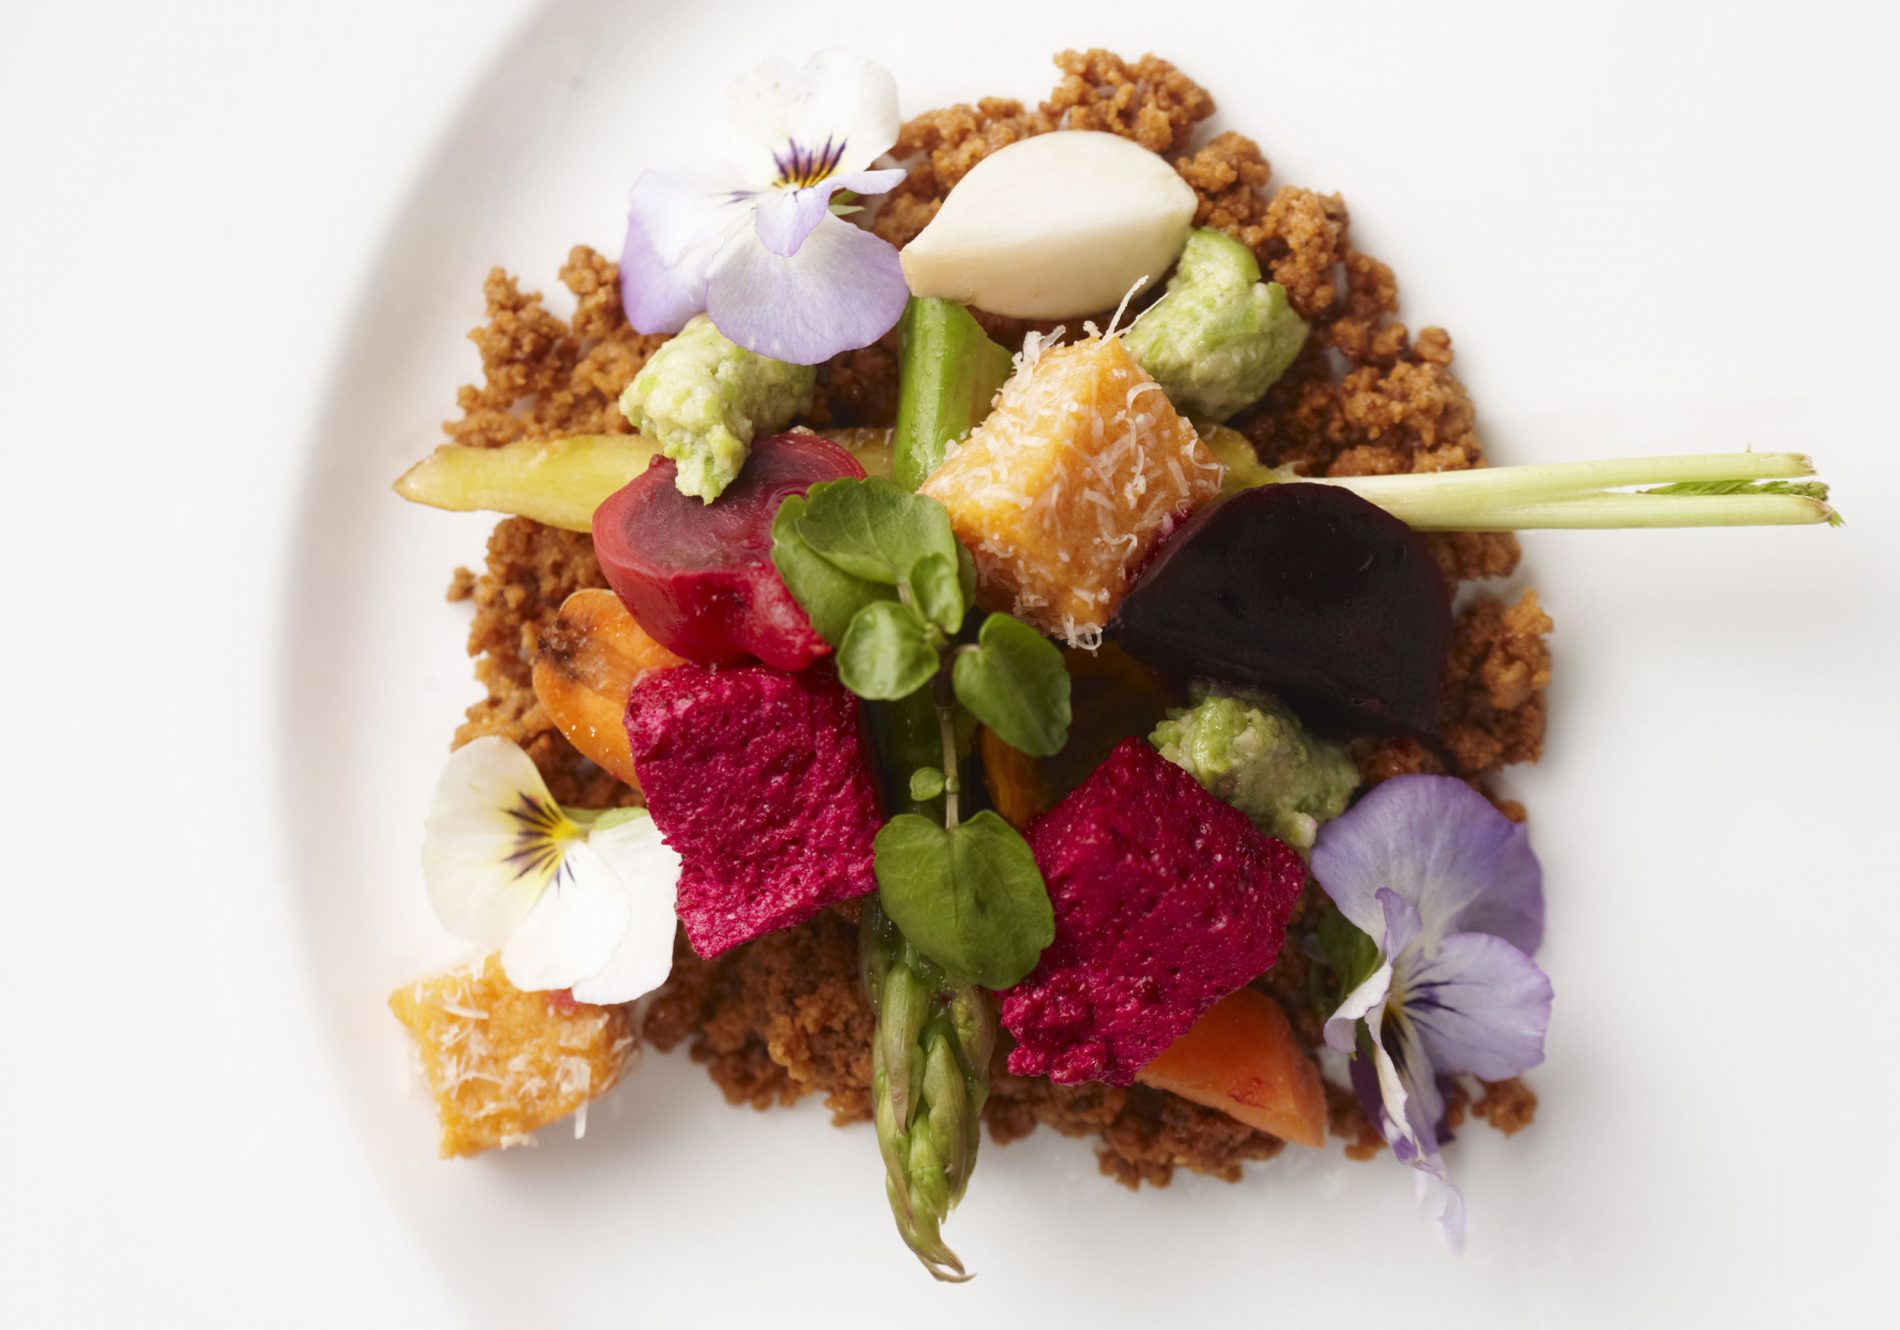 The food at Delaire Graff Restaurant in Stellenbosch uses hand-picked vegetables and fruits picked every morning from the estate’s own greenhouse. Photo Credit Delaire Graff